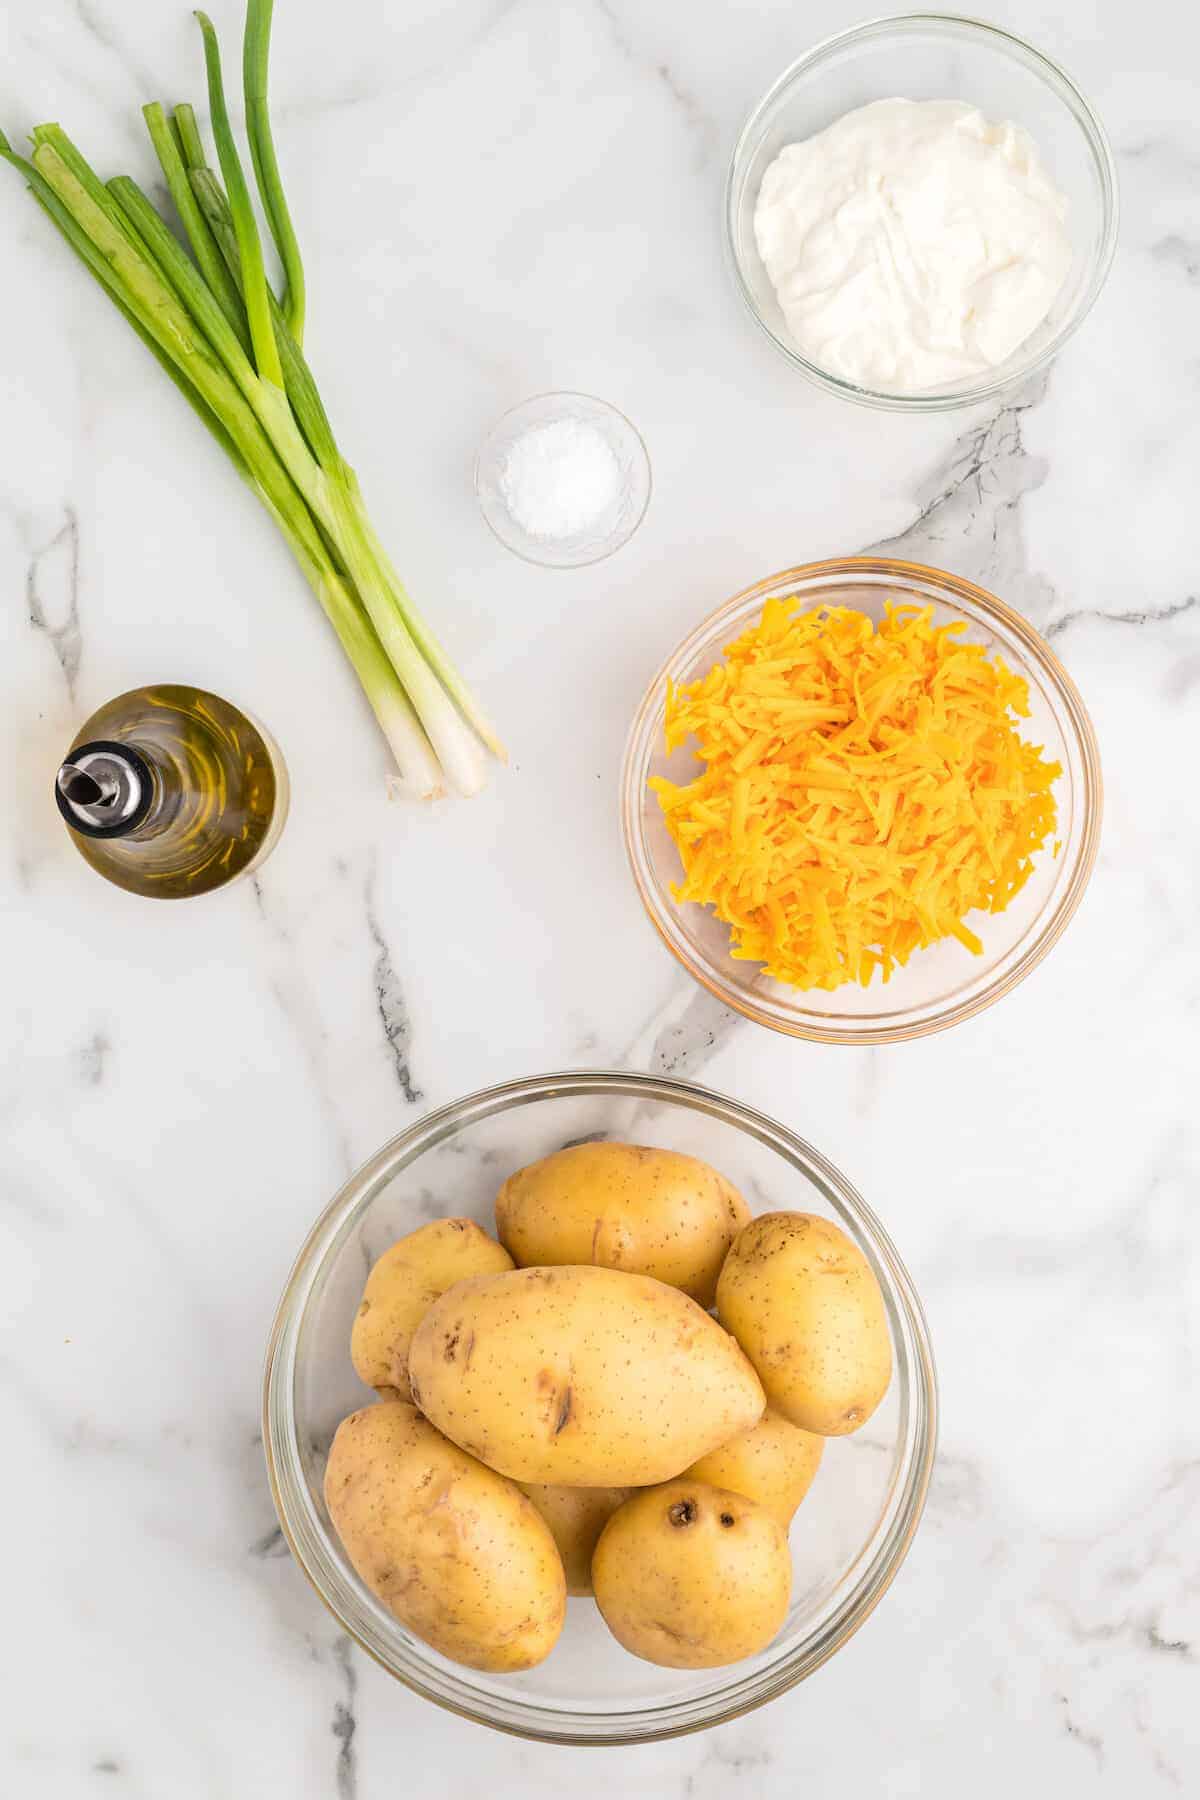 ingredients for the smoked twice baked potatoes in small glass bowls.